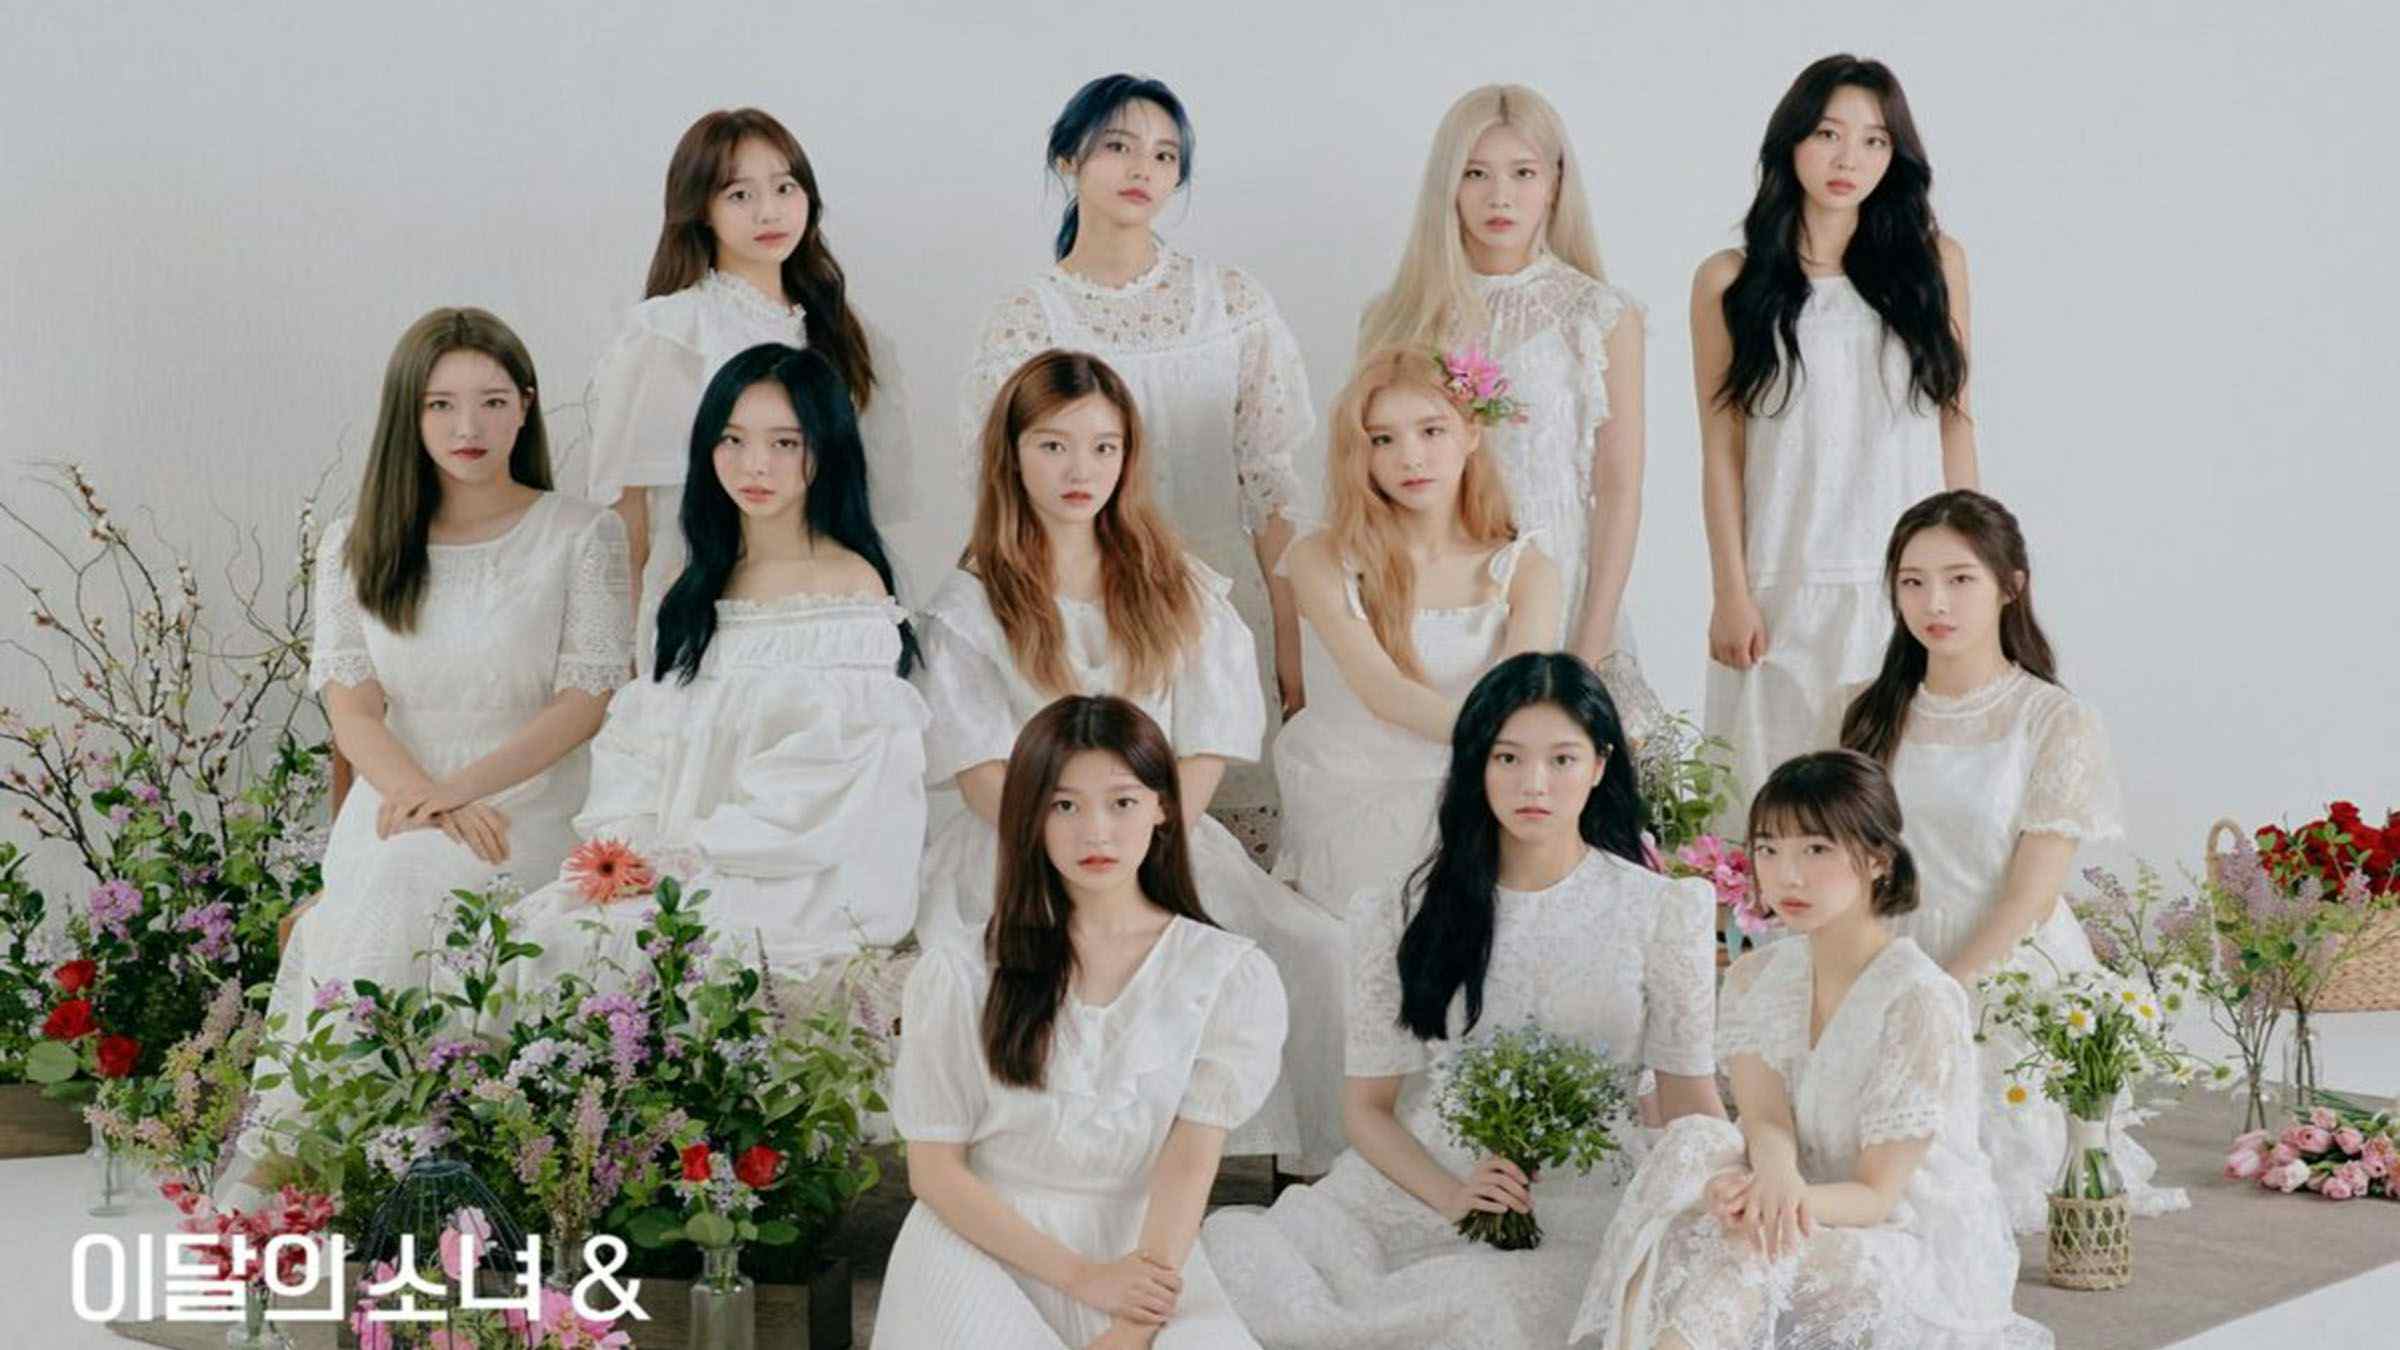 Universal Music Japan wants exclusive management of LOONA